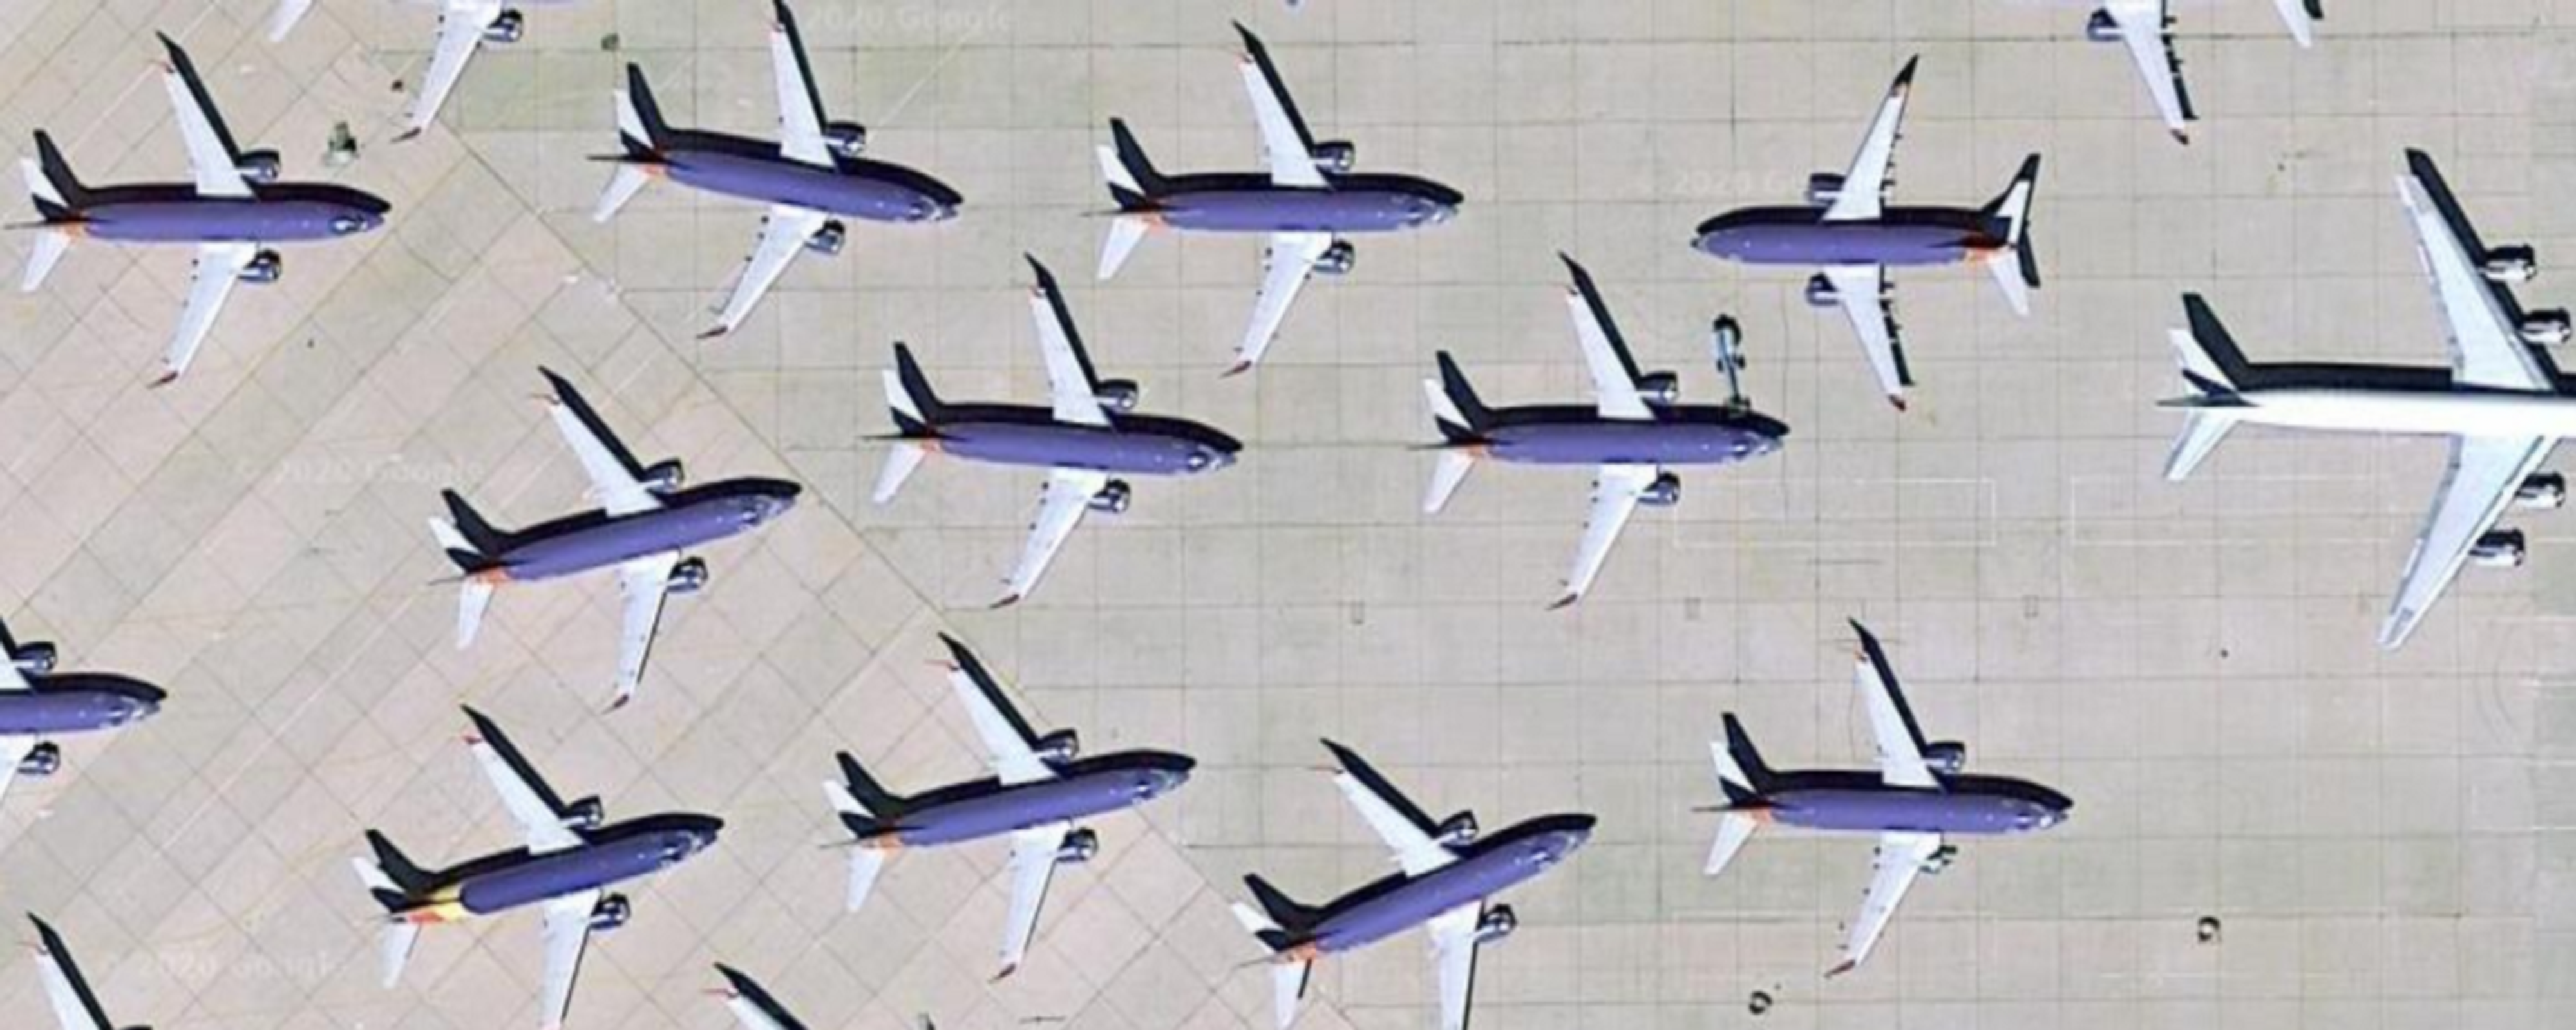  A group of airplanes parked on a runway